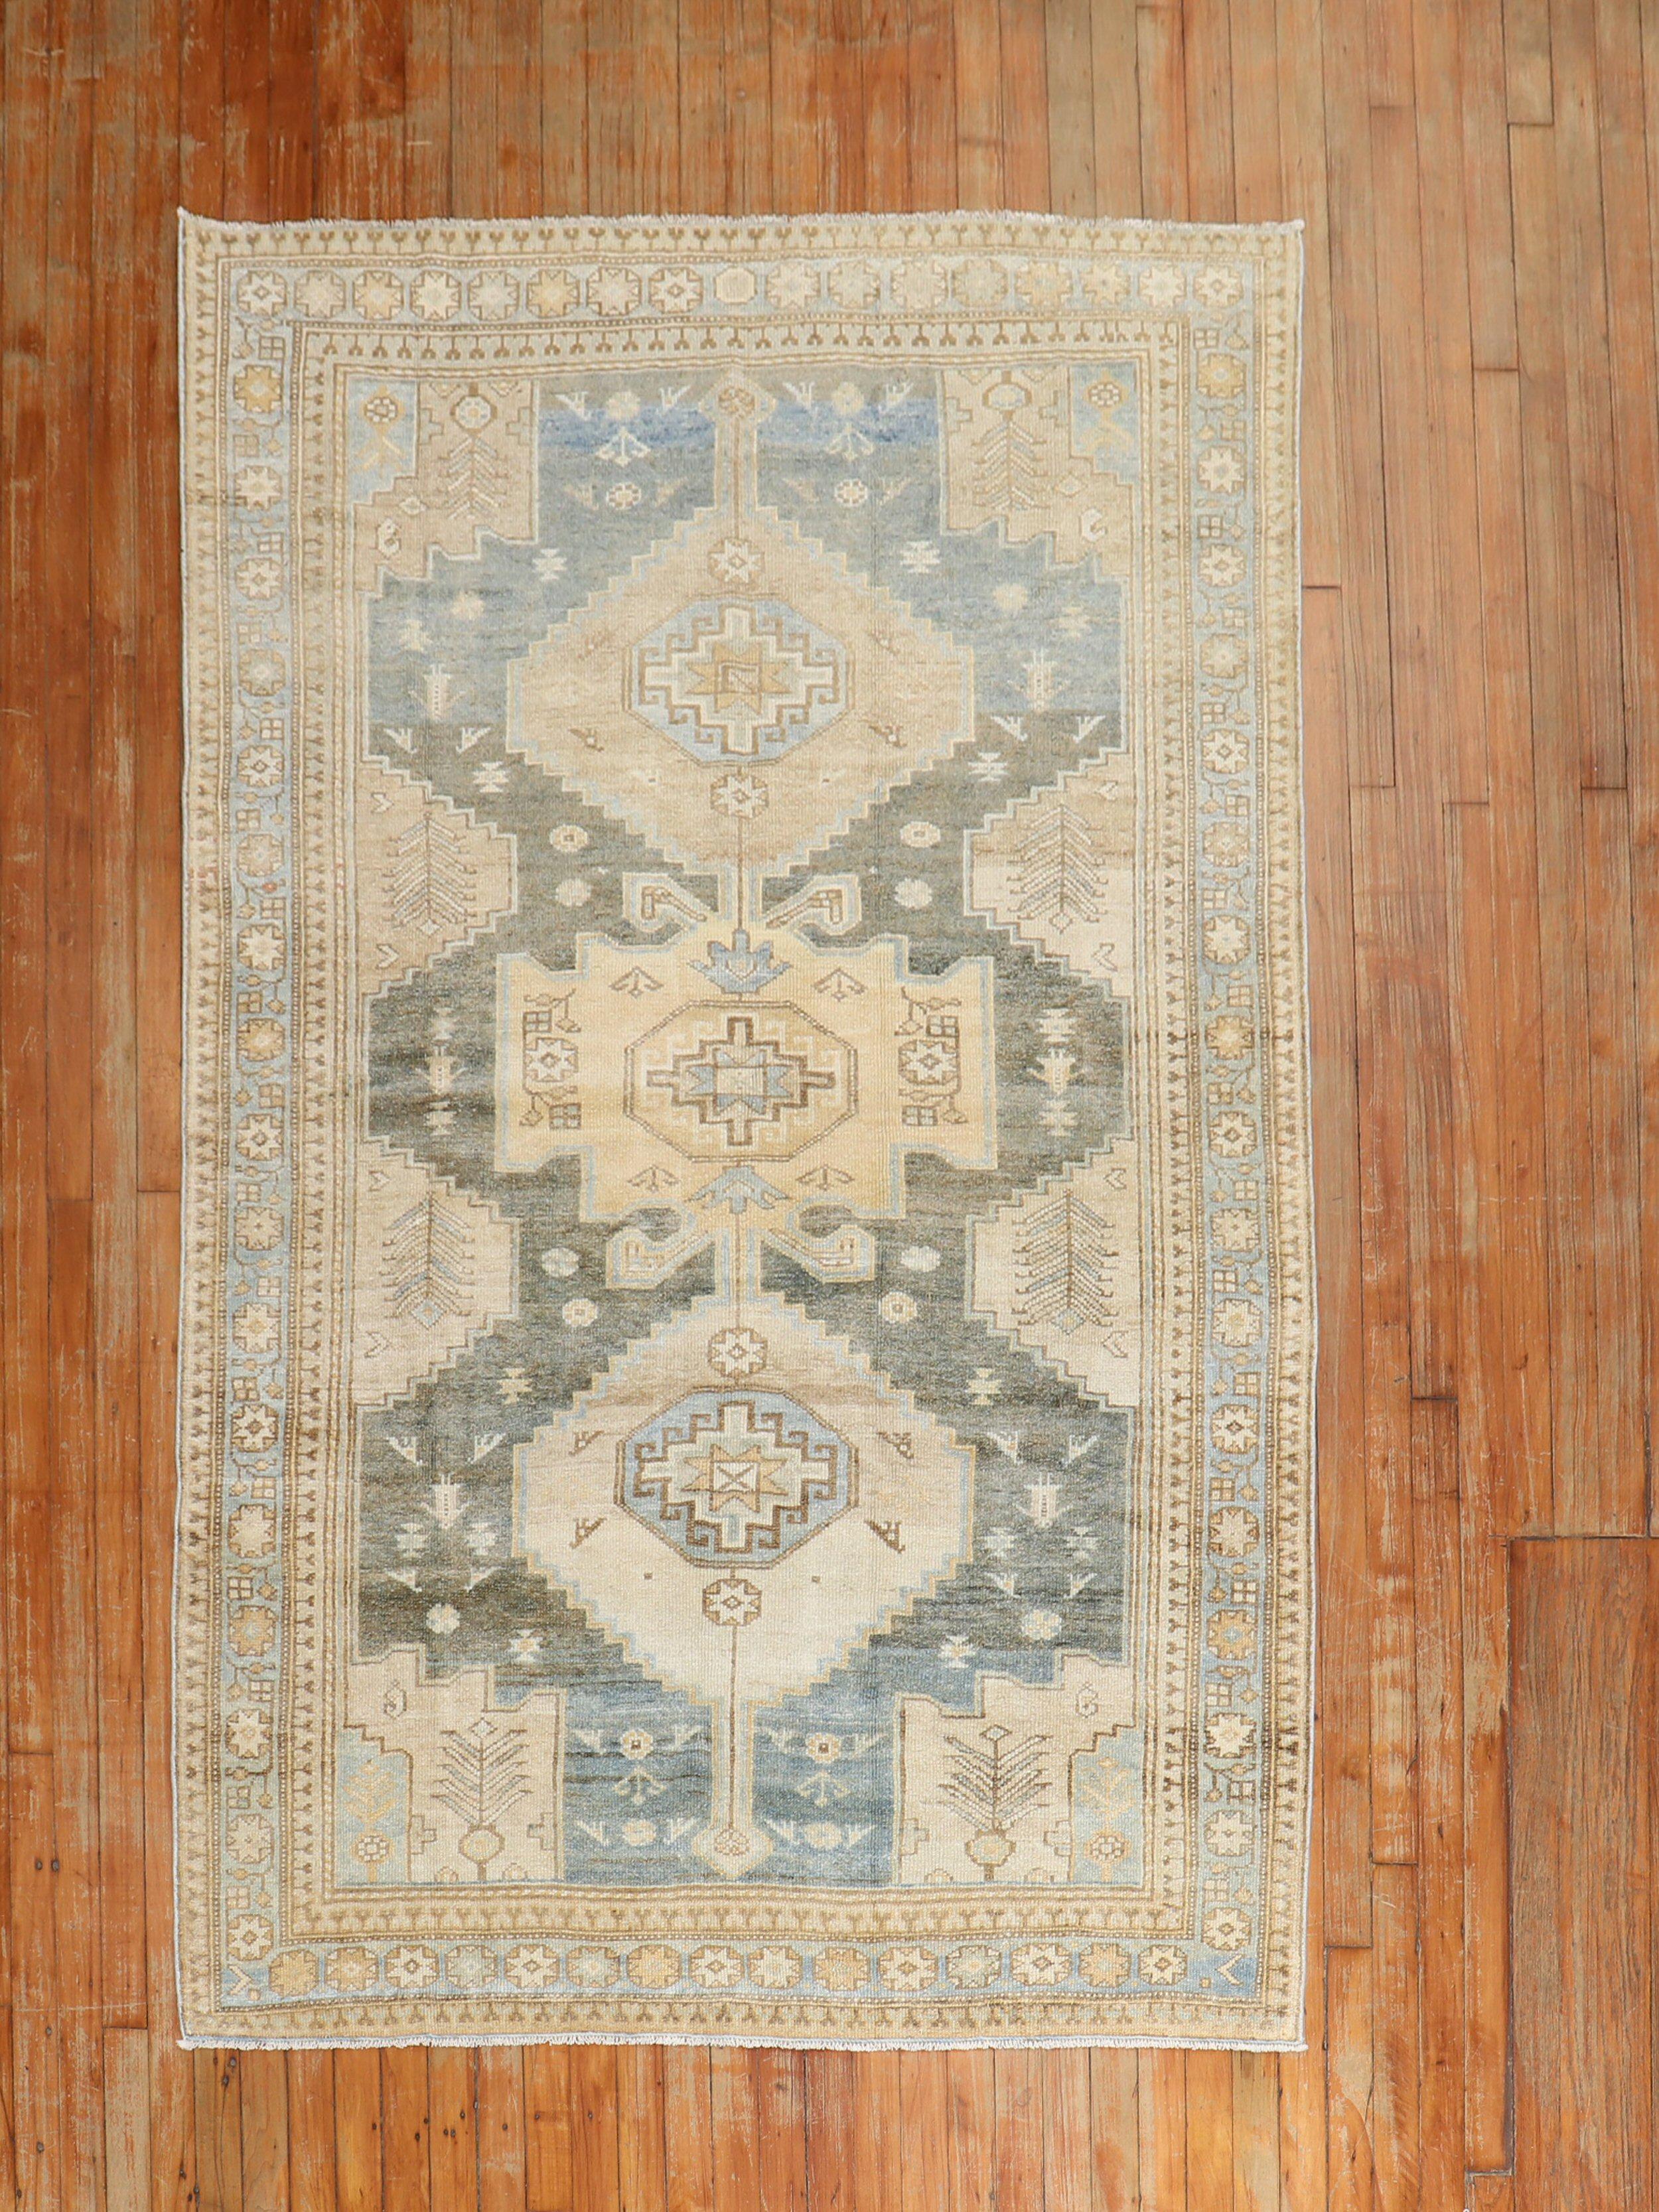 An antique Persian Malayer scatter size rug from the 2nd quarter of the 20th century in blue, brown, sand, gray, and camel tones

Measures: 4'7” x 7'3''.